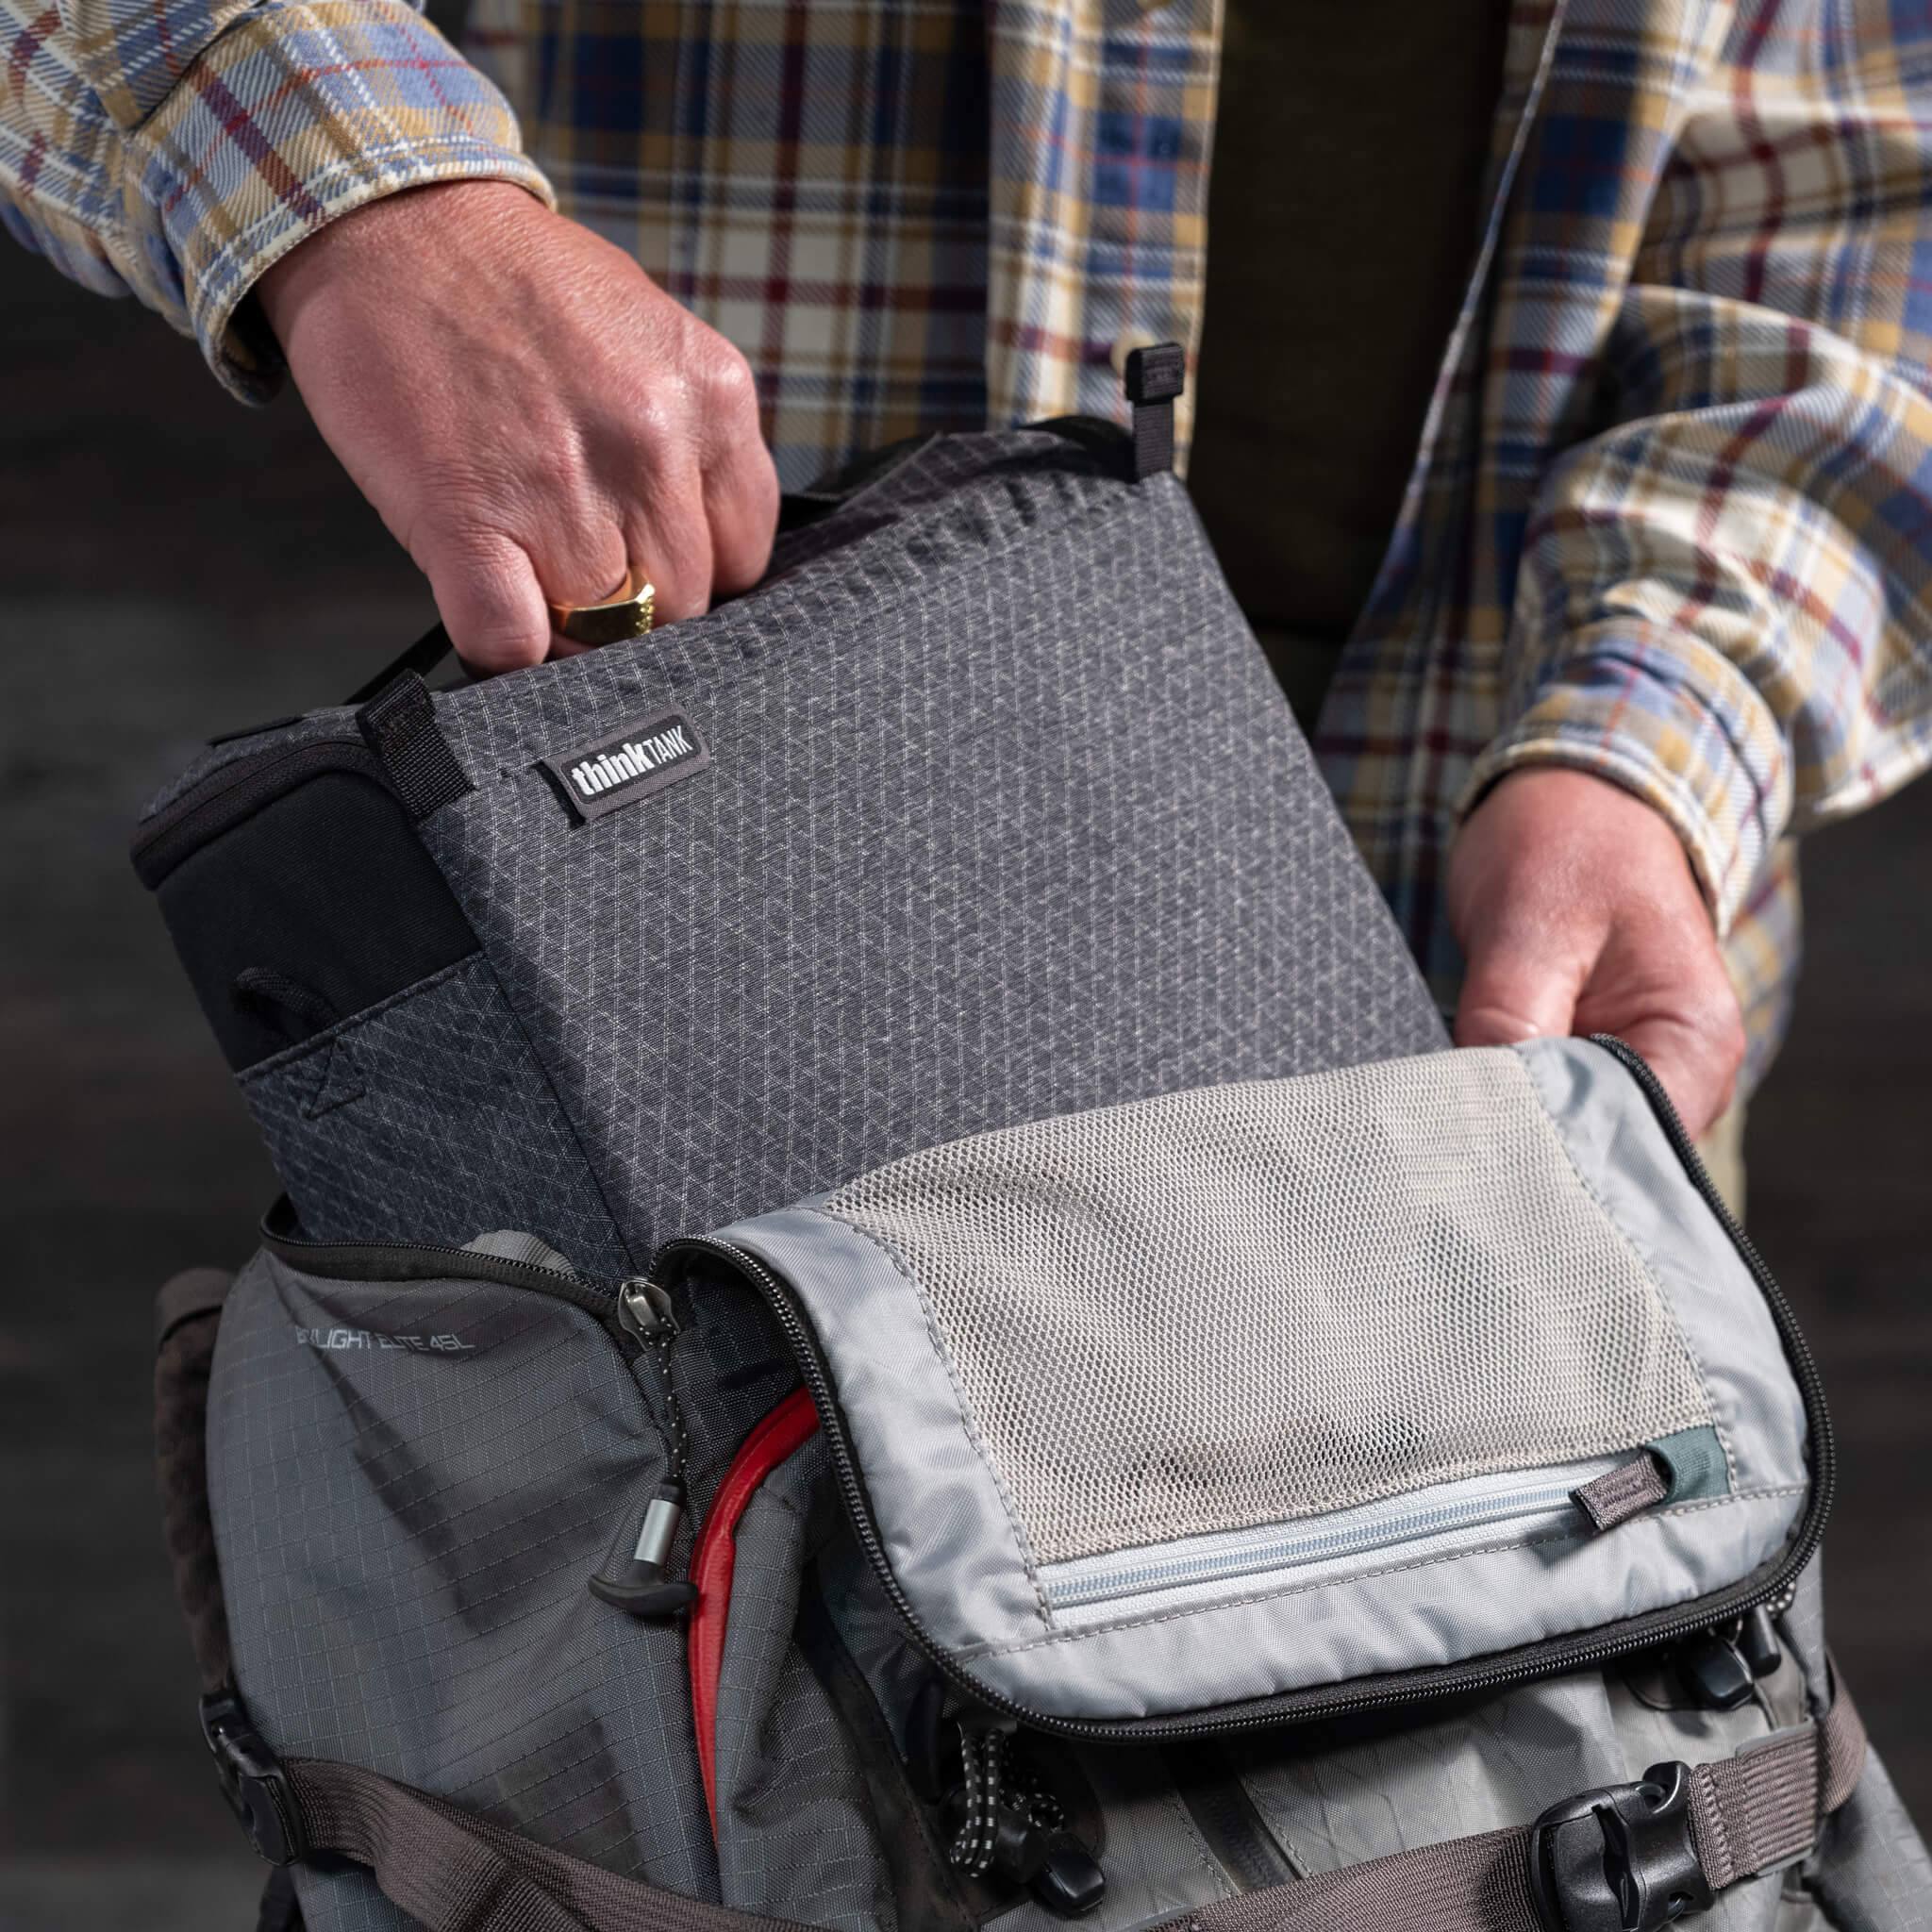 Grab handle makes it easy to pull camera cube from a bag or backpack